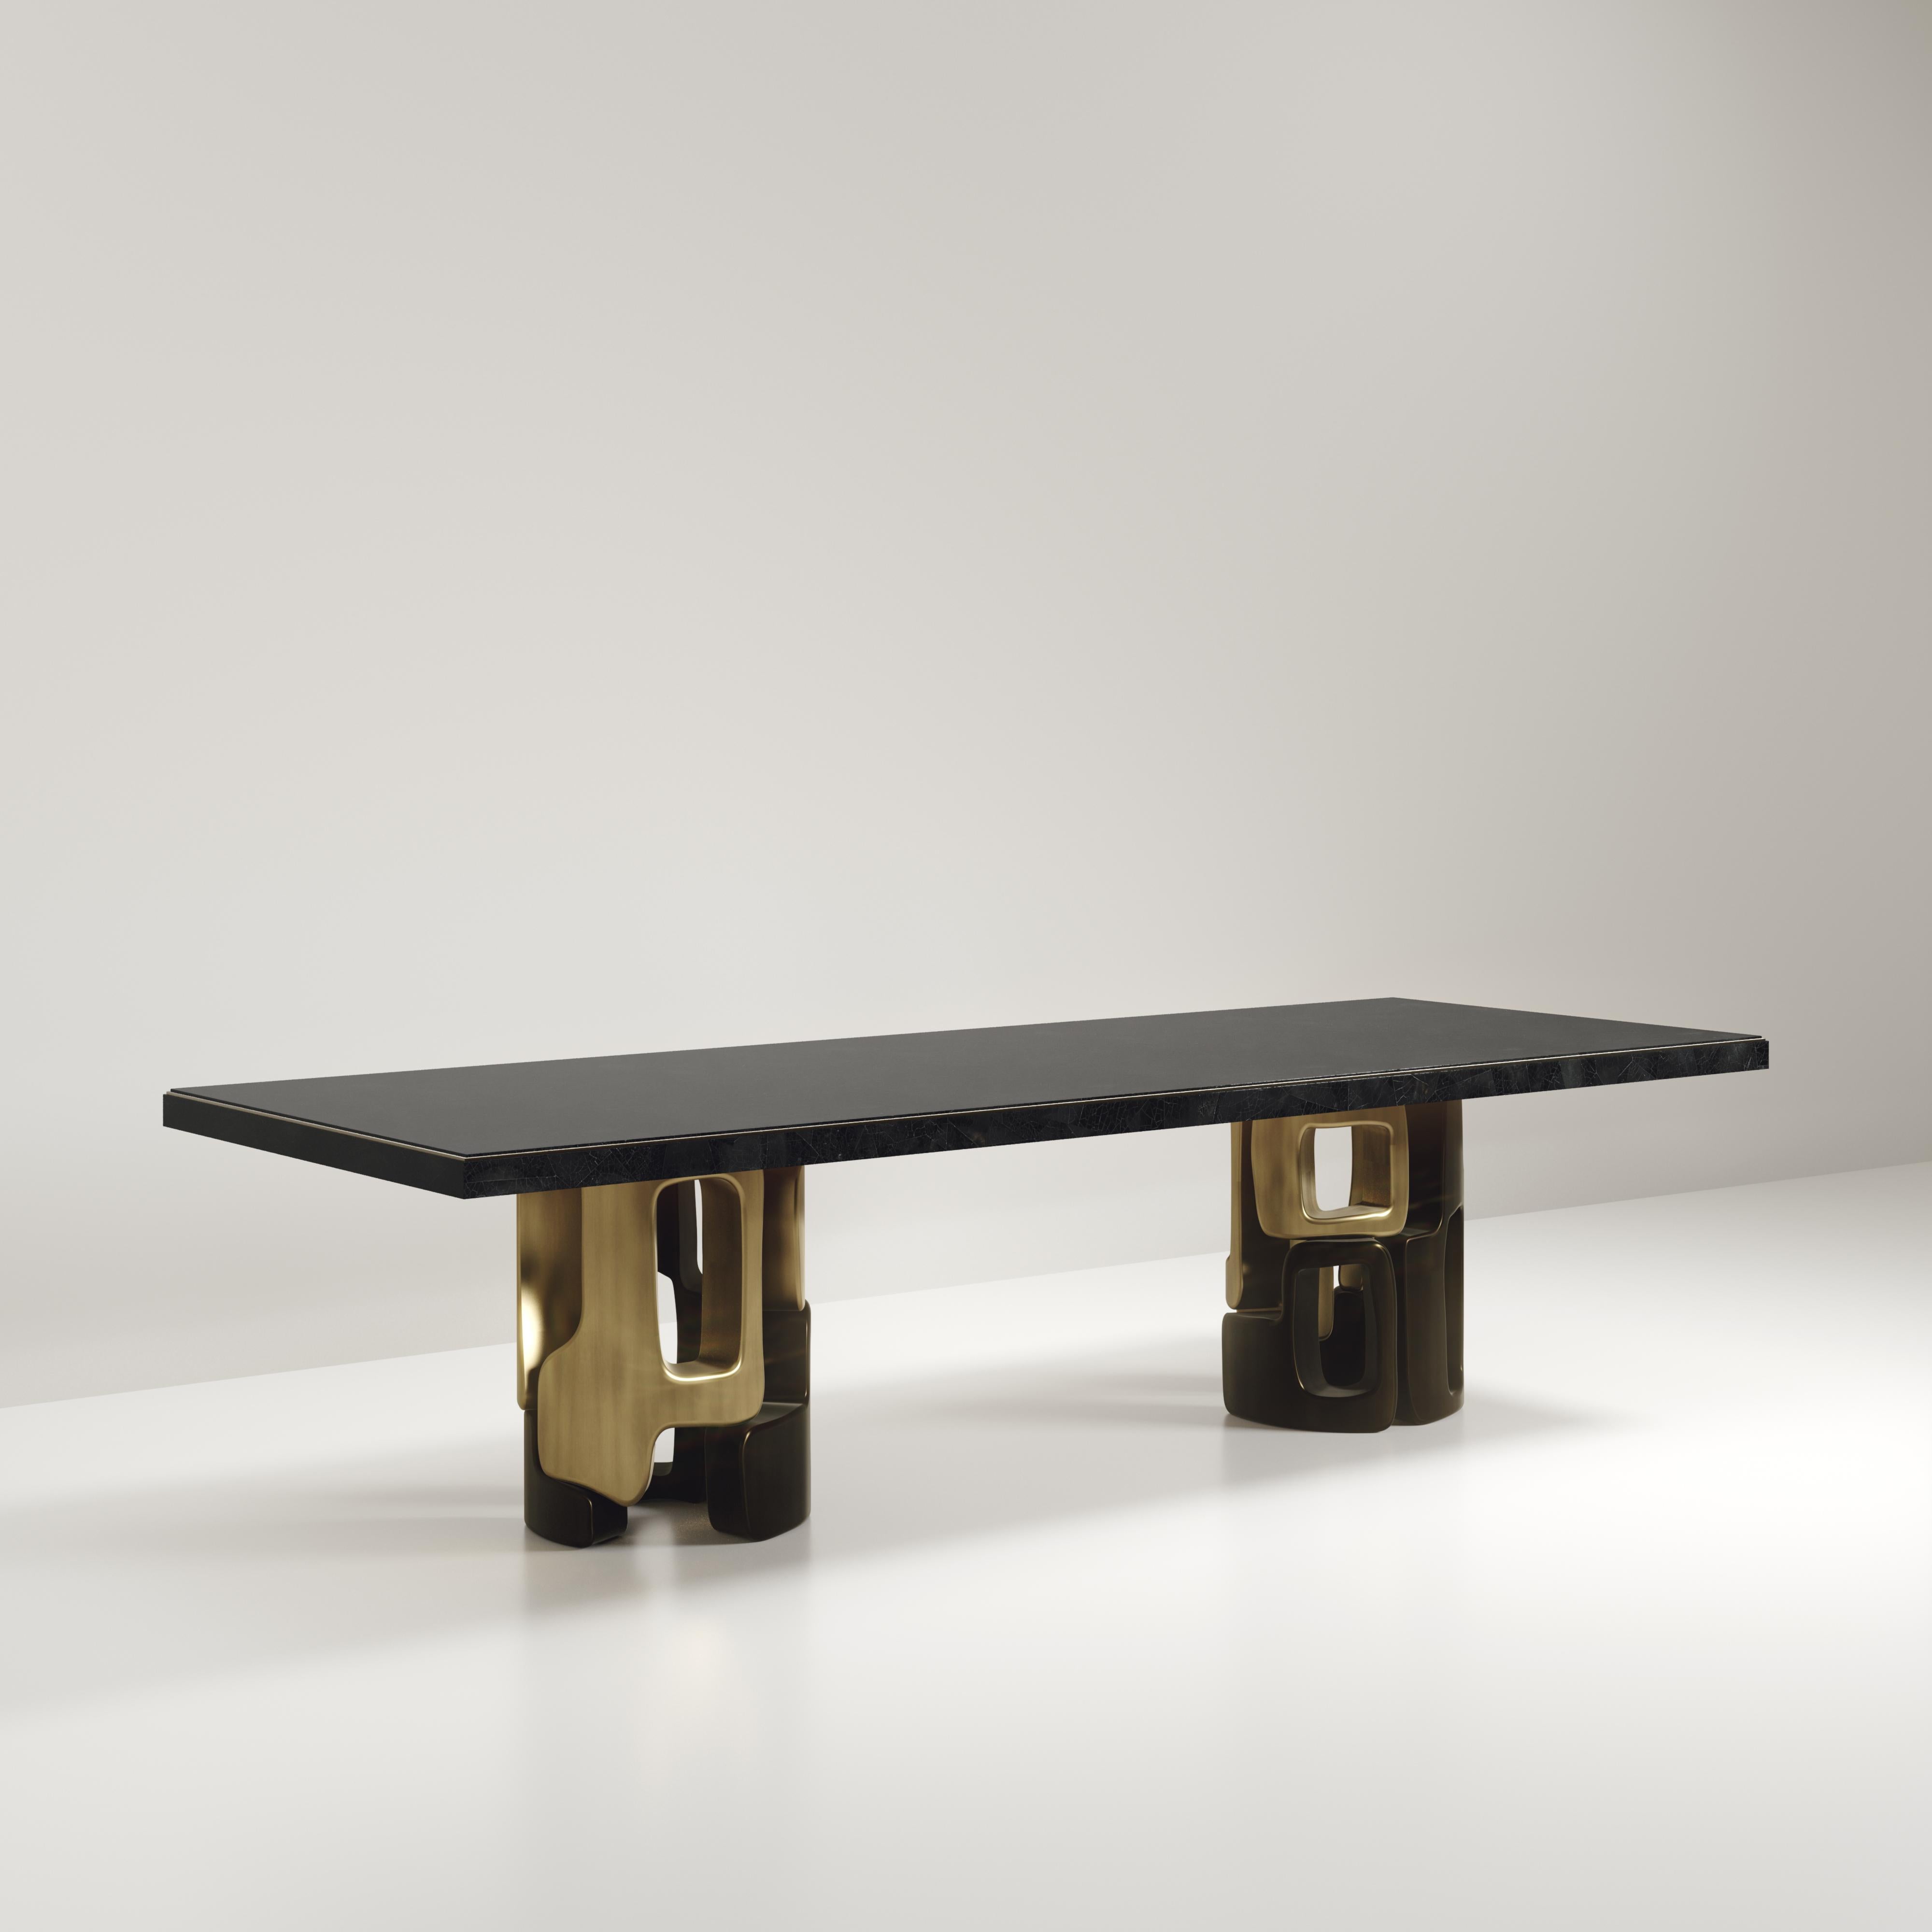 Inlay Shagreen Inlaid Dining Table with Bronze Patina Brass Details by Kifu Paris For Sale